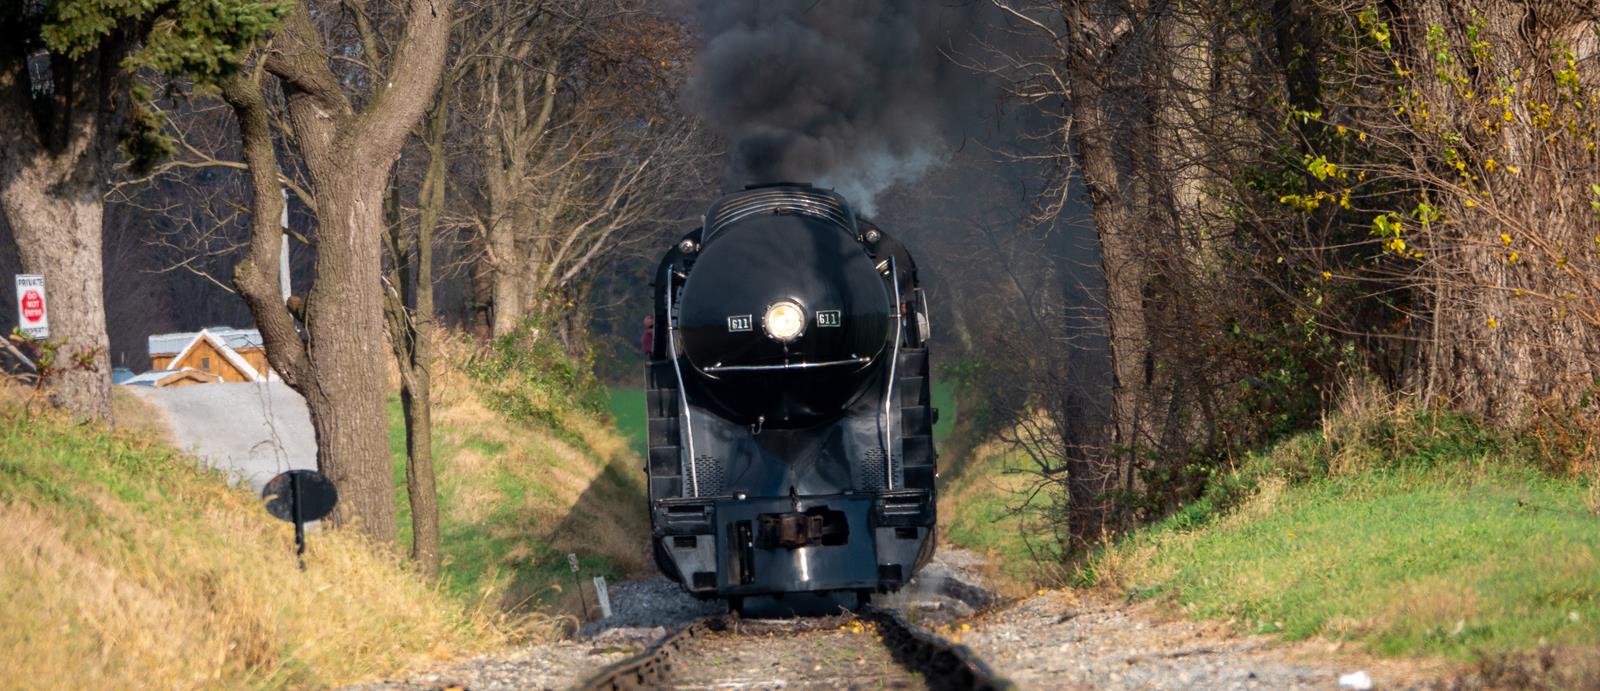 611 is a class J 4-8-4 and  is pictured in Strasburg, Pennsylvania, United States.  This was taken along the Strasburg Rail Road on the Strasburg Rail Road. Photo Copyright: Sean McCaughey uploaded to Railroad Gallery on 11/15/2022. This photograph of 611 was taken on Saturday, November 12, 2022. All Rights Reserved. 